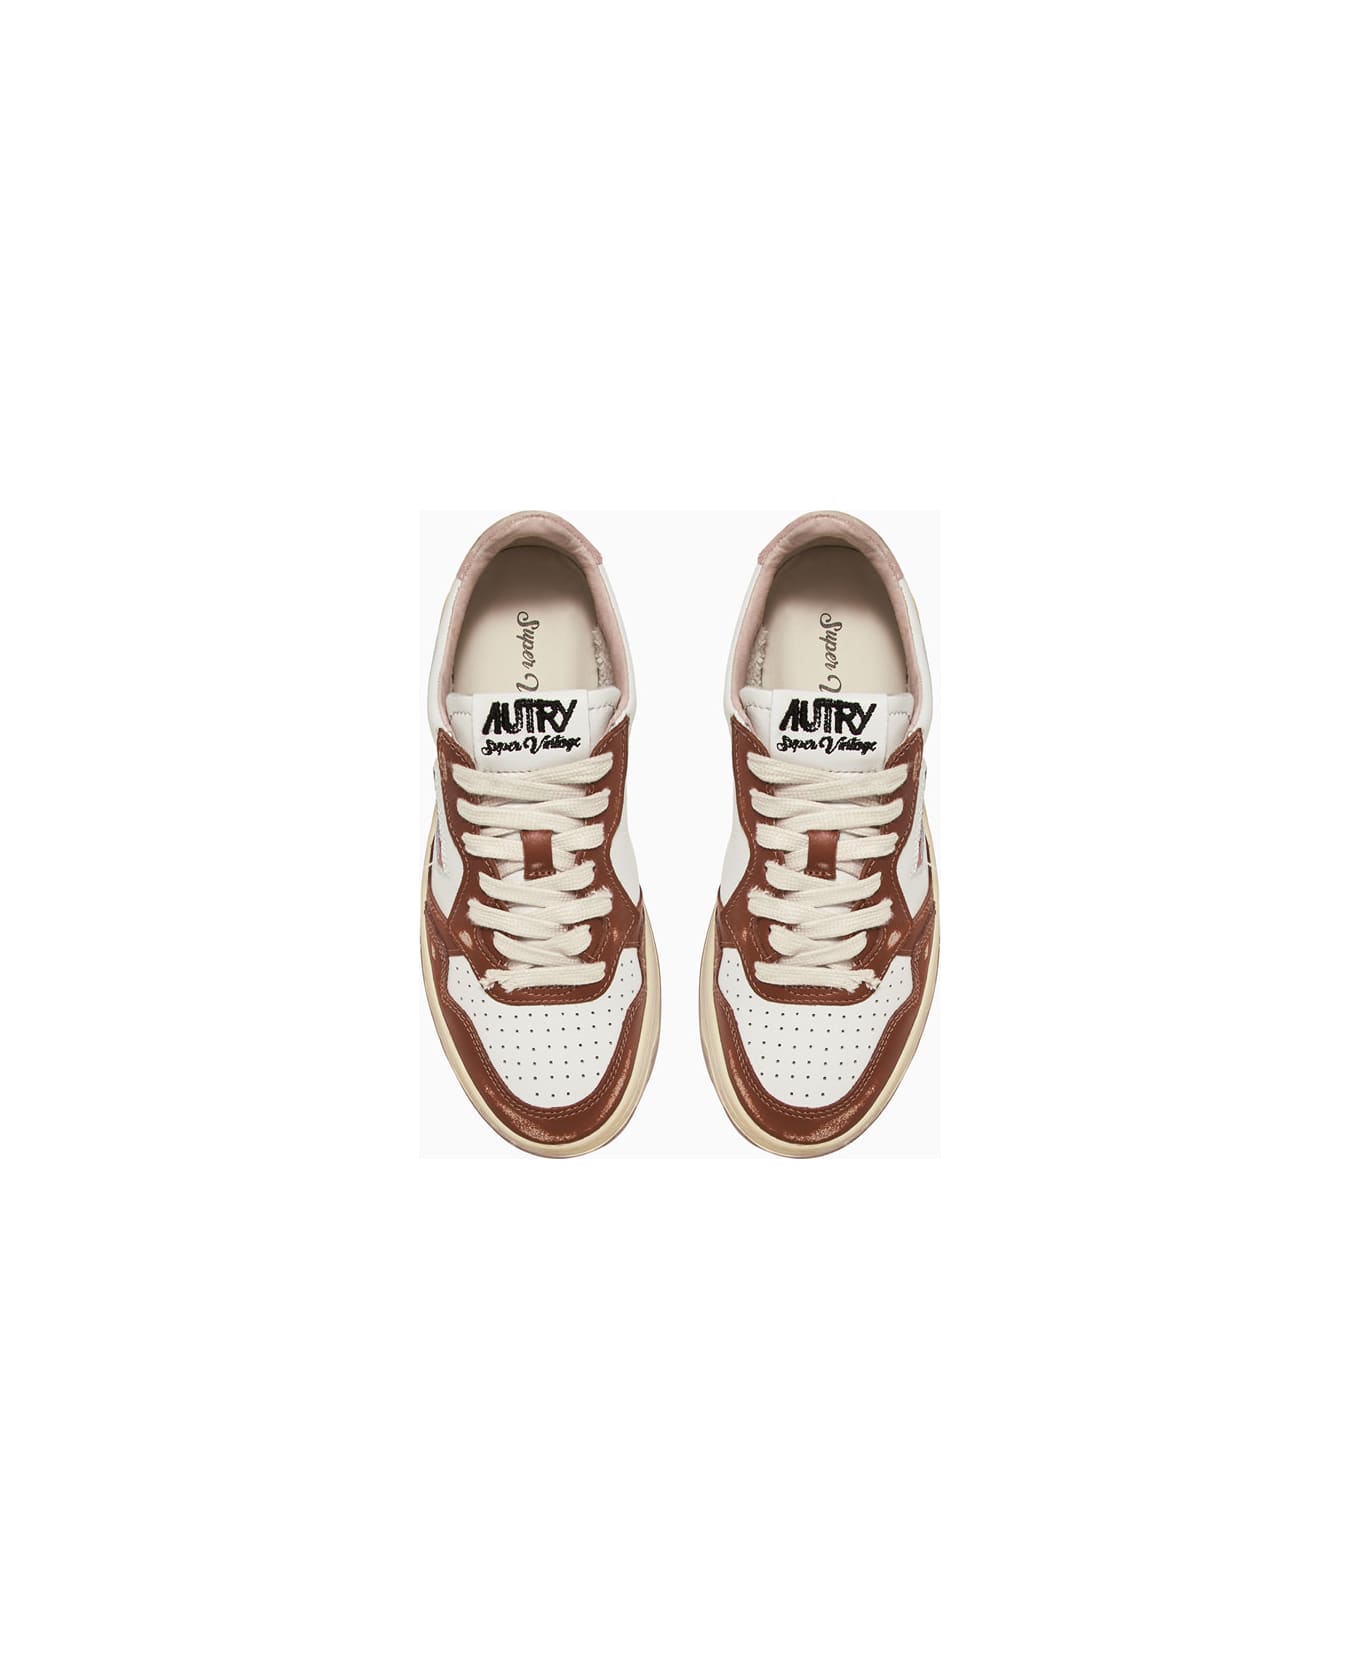 Autry Super Vintage Low Sneakers Avlw Cl01 - WHITE/Brown